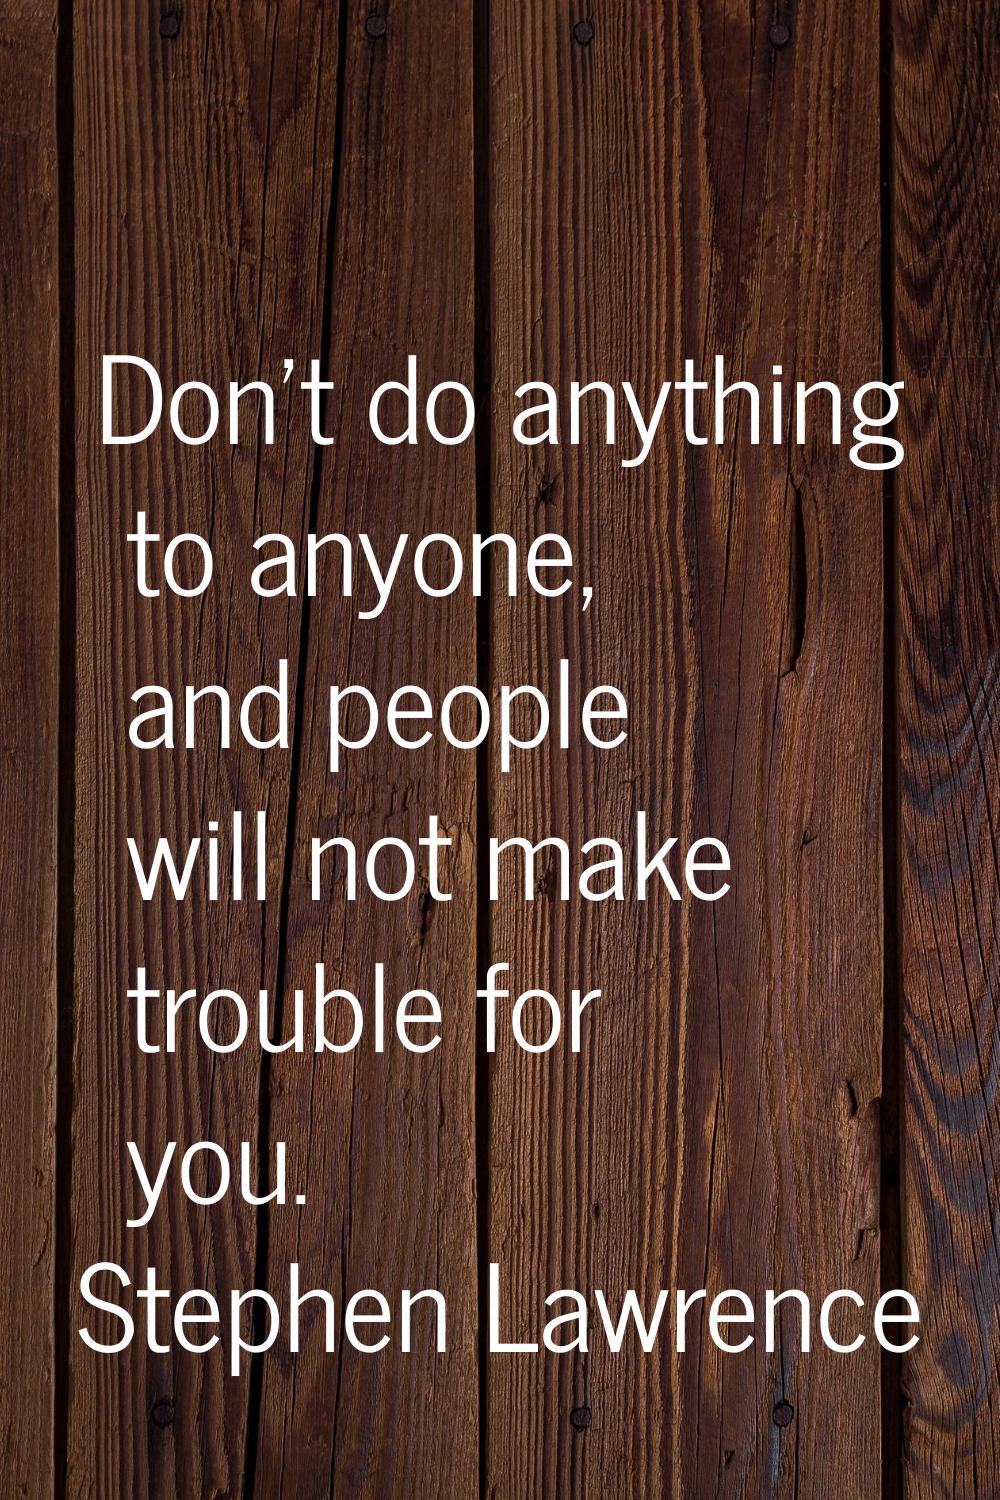 Don't do anything to anyone, and people will not make trouble for you.